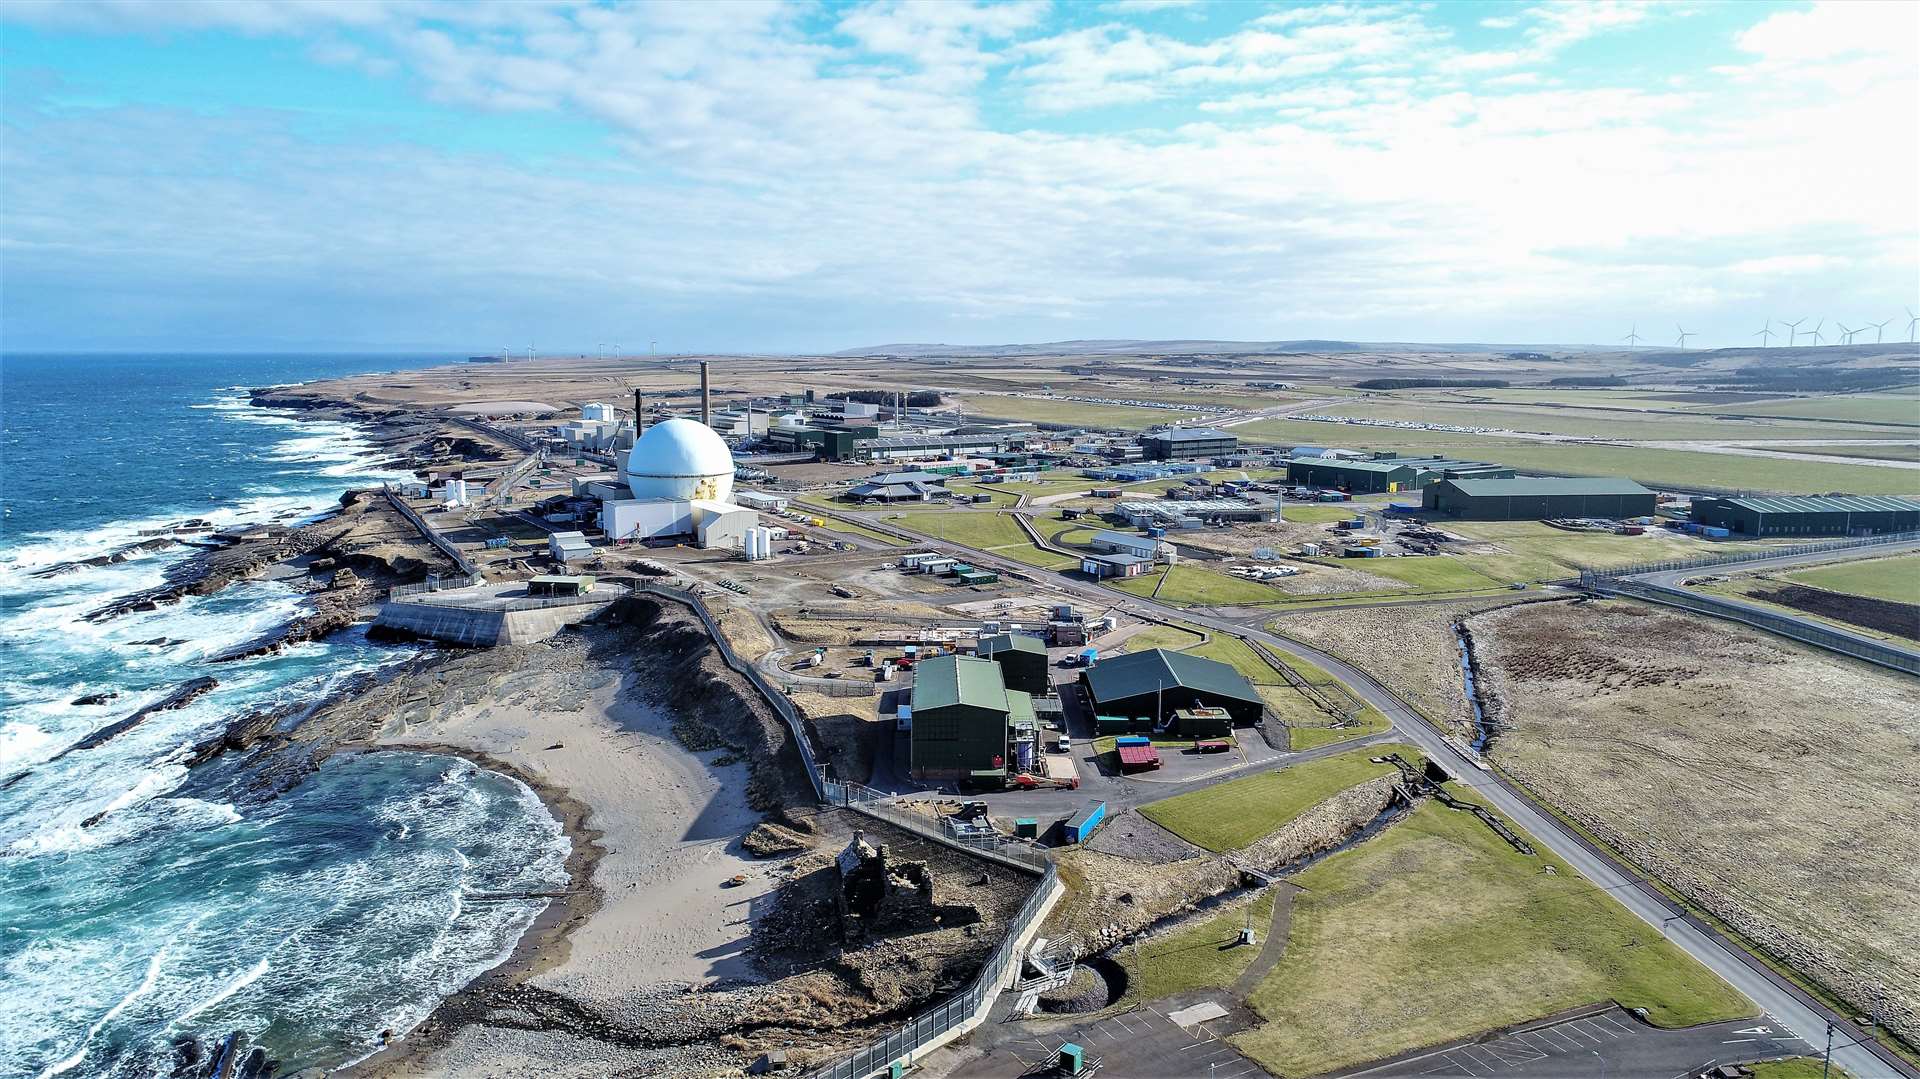 The Dounreay facility was investigated by an environmental agency over radioactive gas that was leaked. Picture: DSRL / NDA